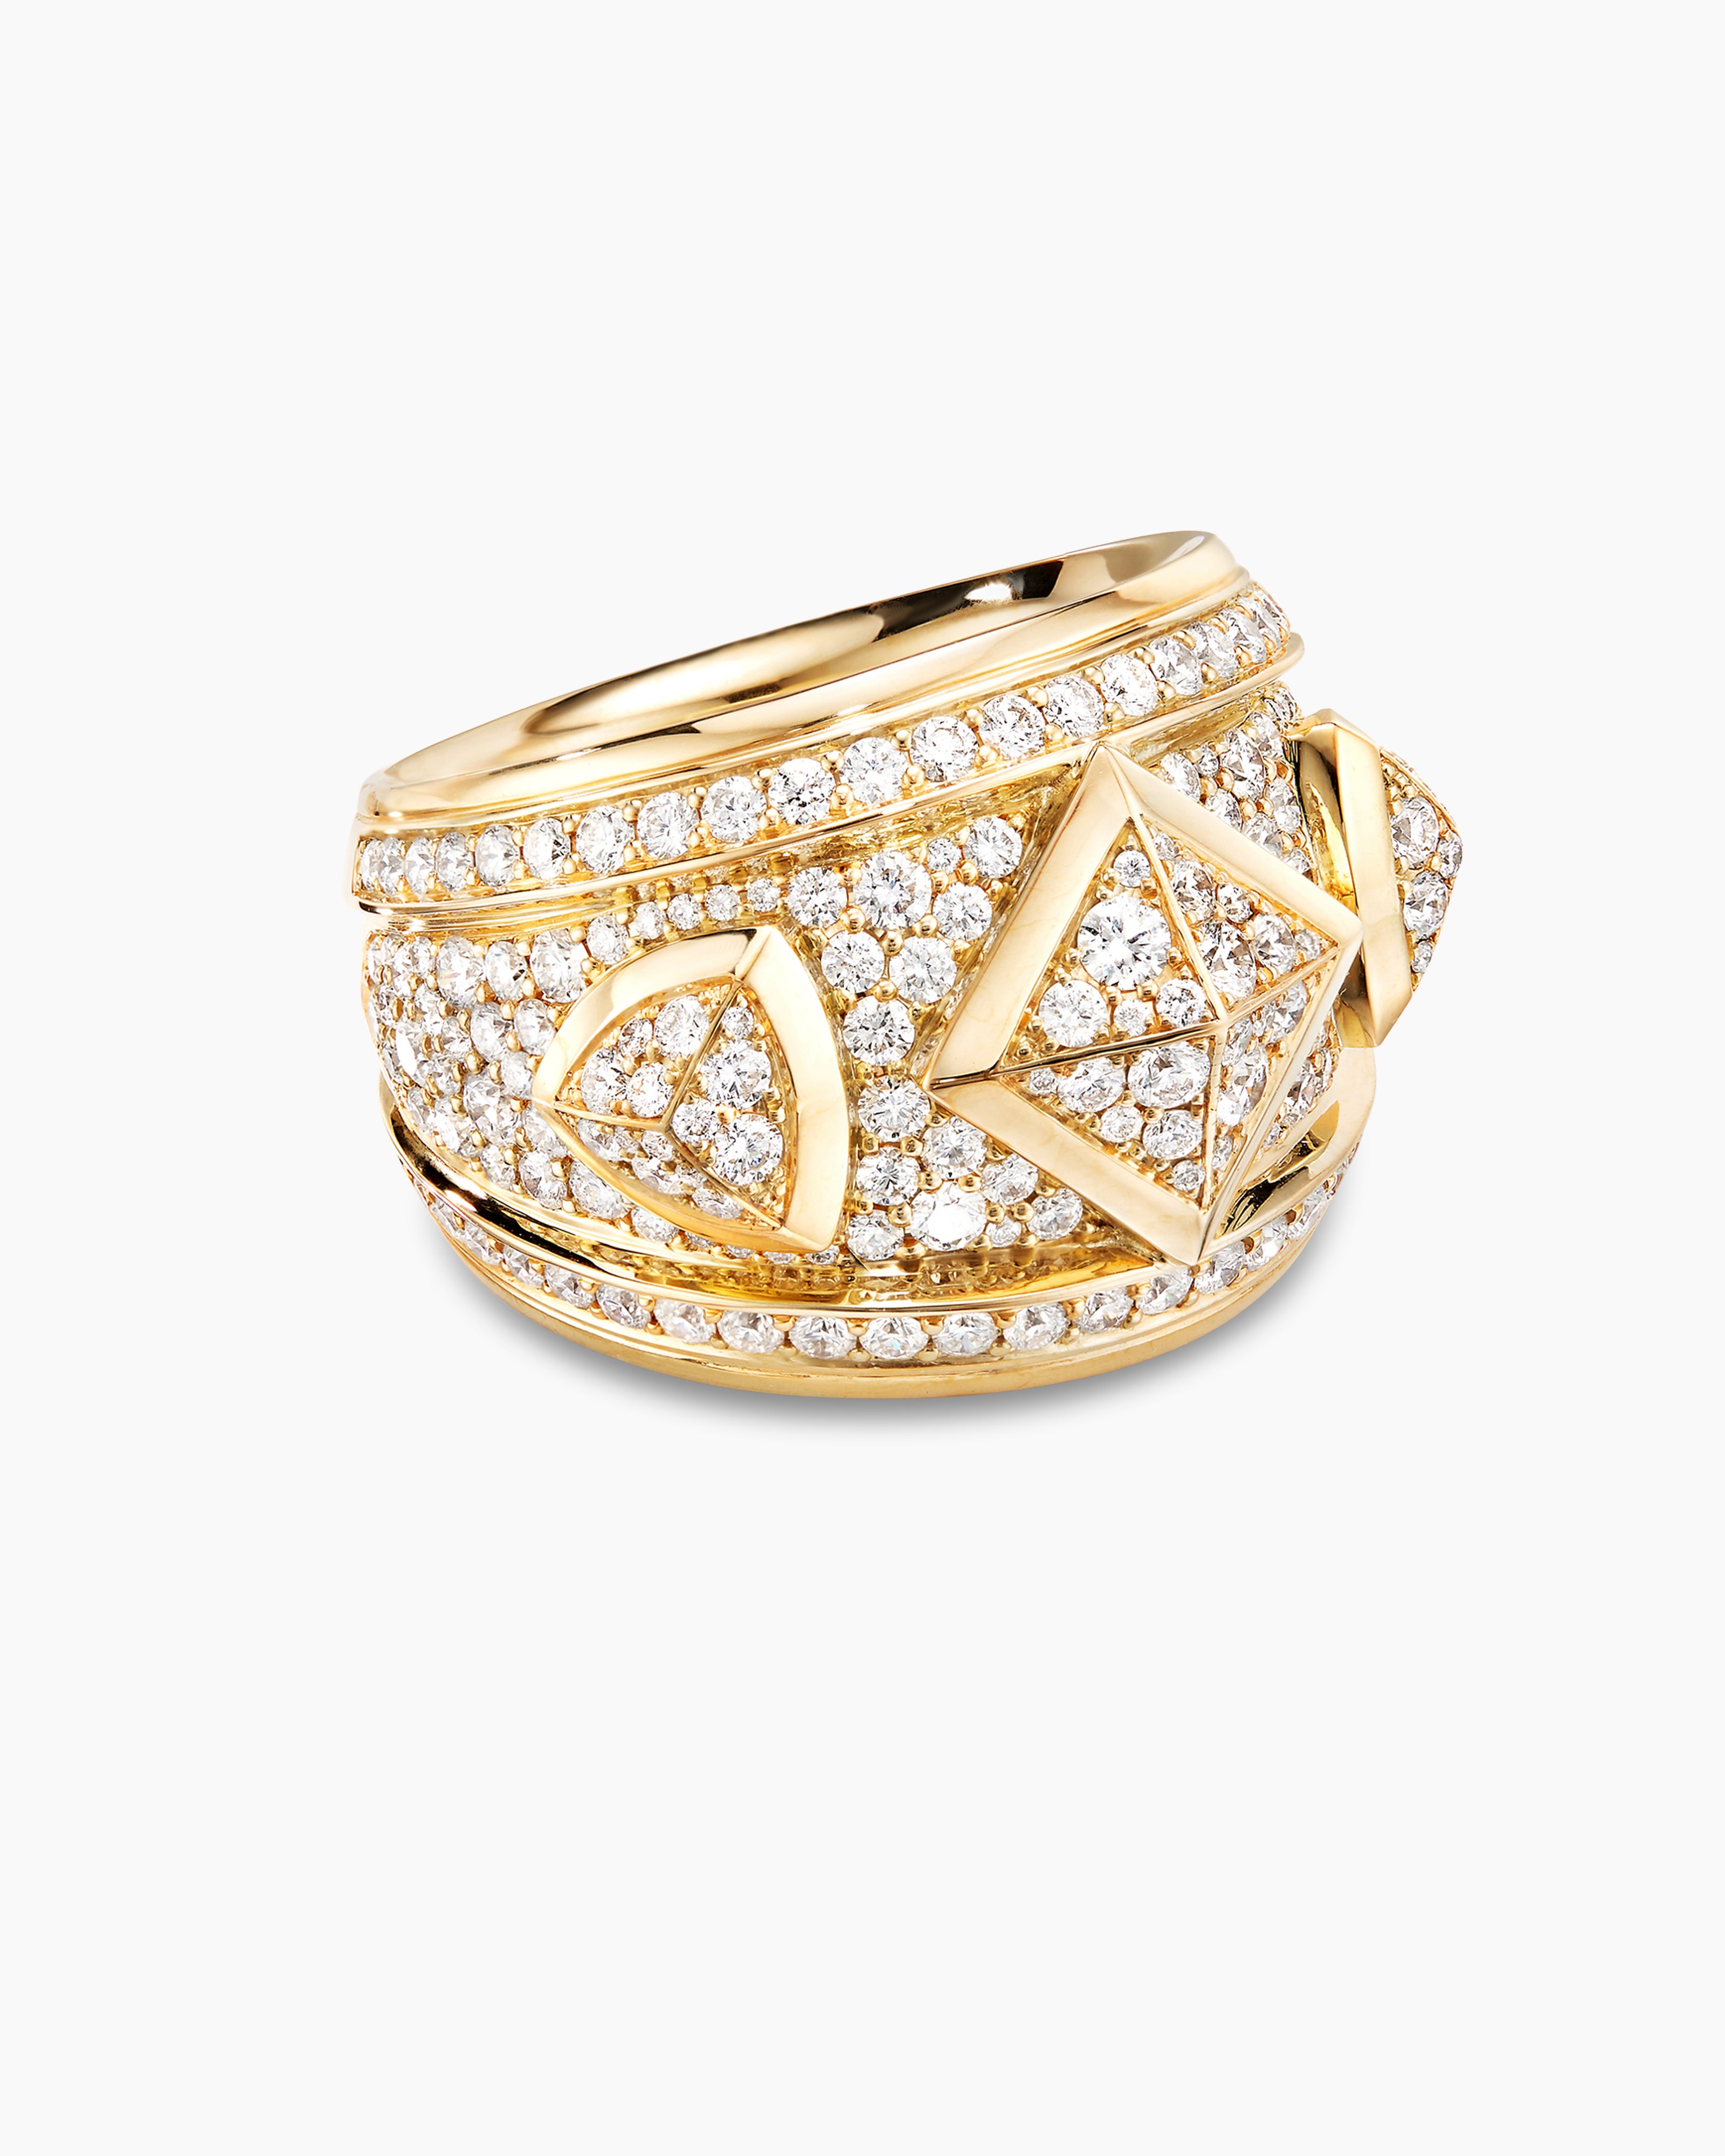 Modern Renaissance Ring in 18K Yellow Gold with Diamonds, 18.6mm